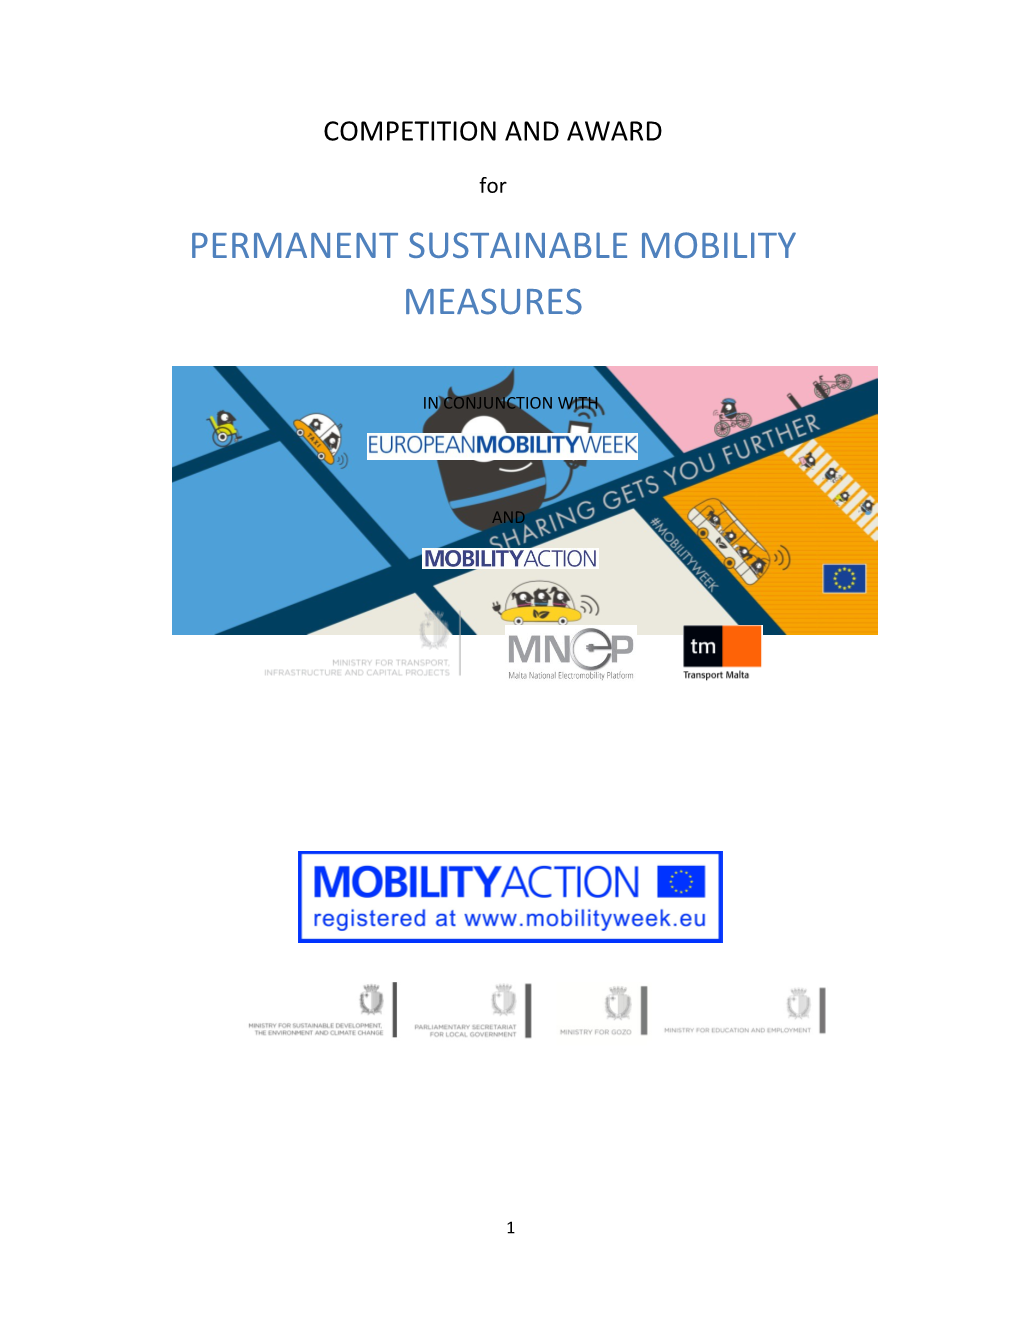 Permanent Sustainable Mobility Measures